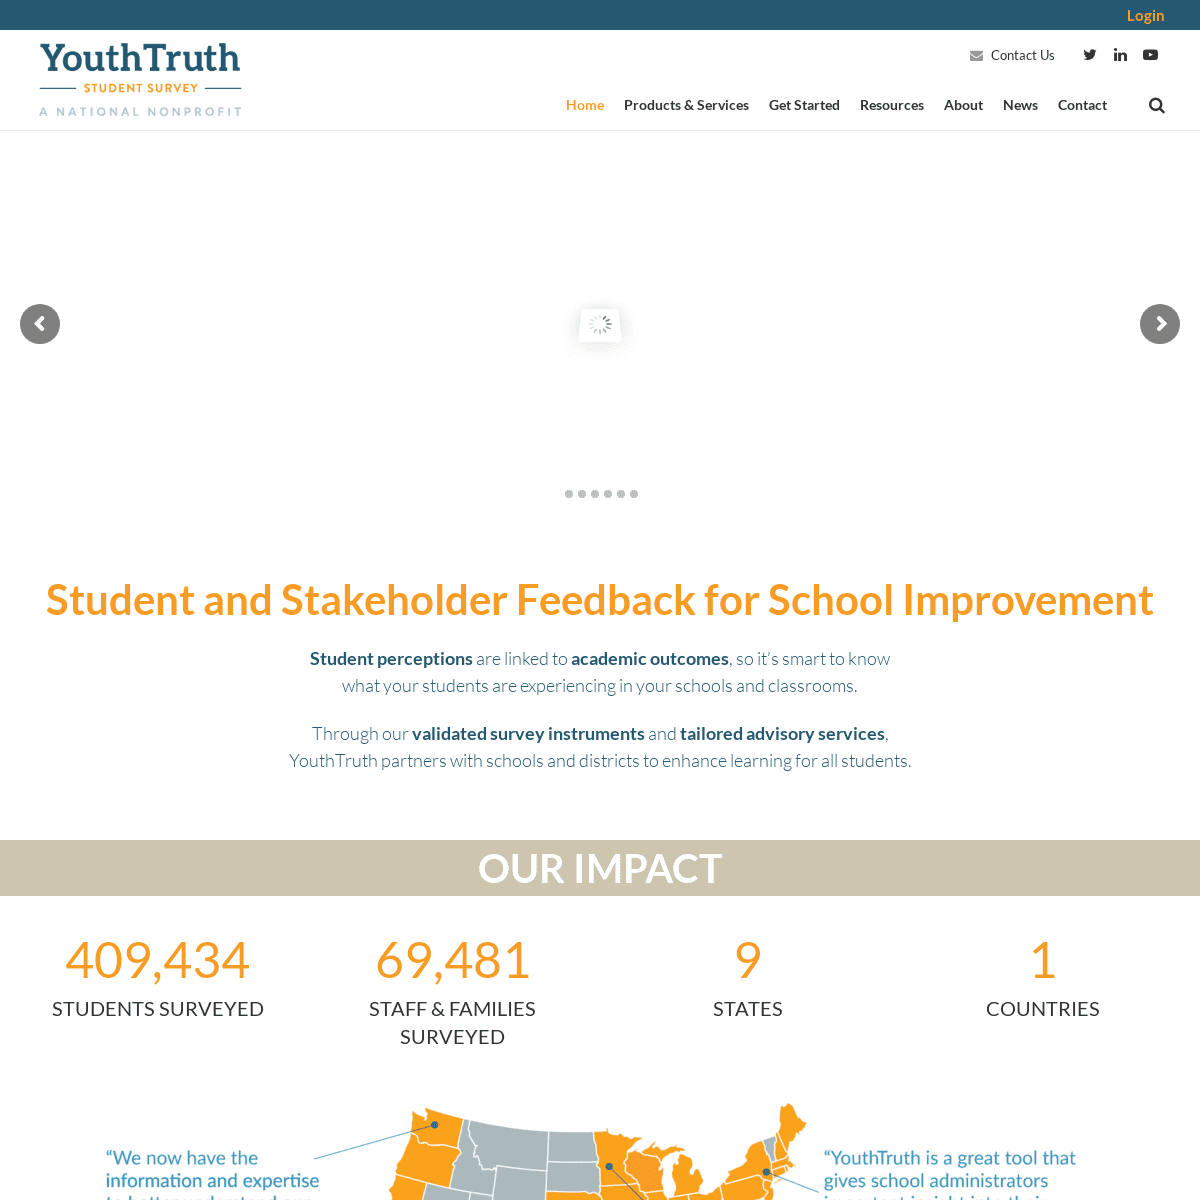 A complete backup of https://youthtruthsurvey.org